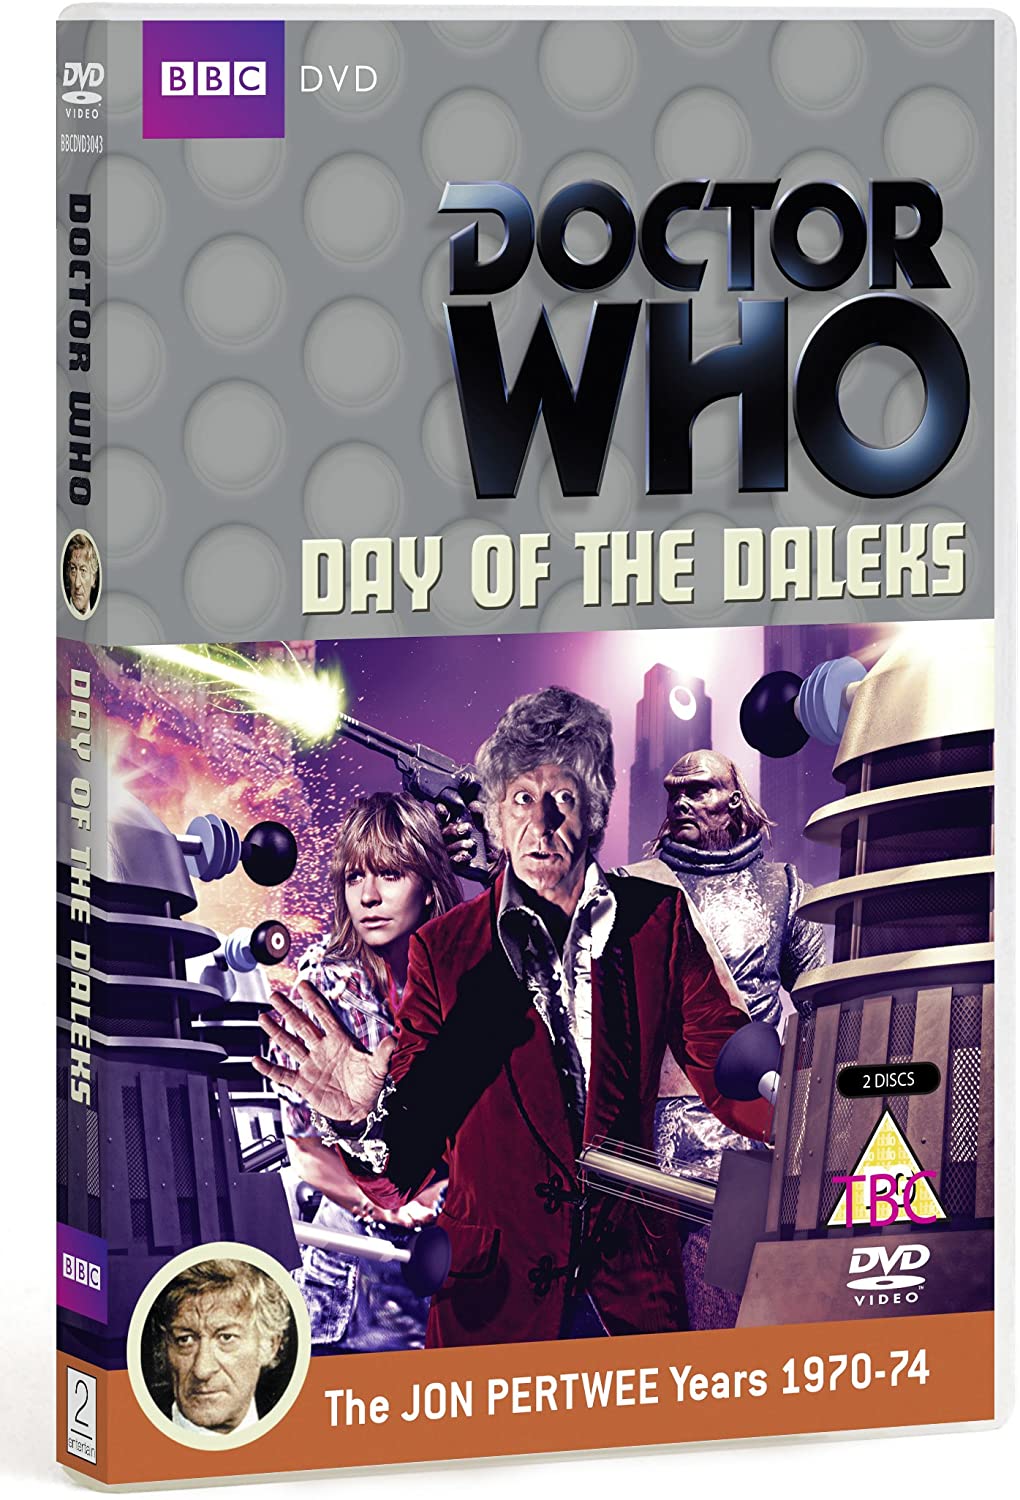 Doctor Who - Day of the Daleks [1972] - Sci-fi  [DVD]